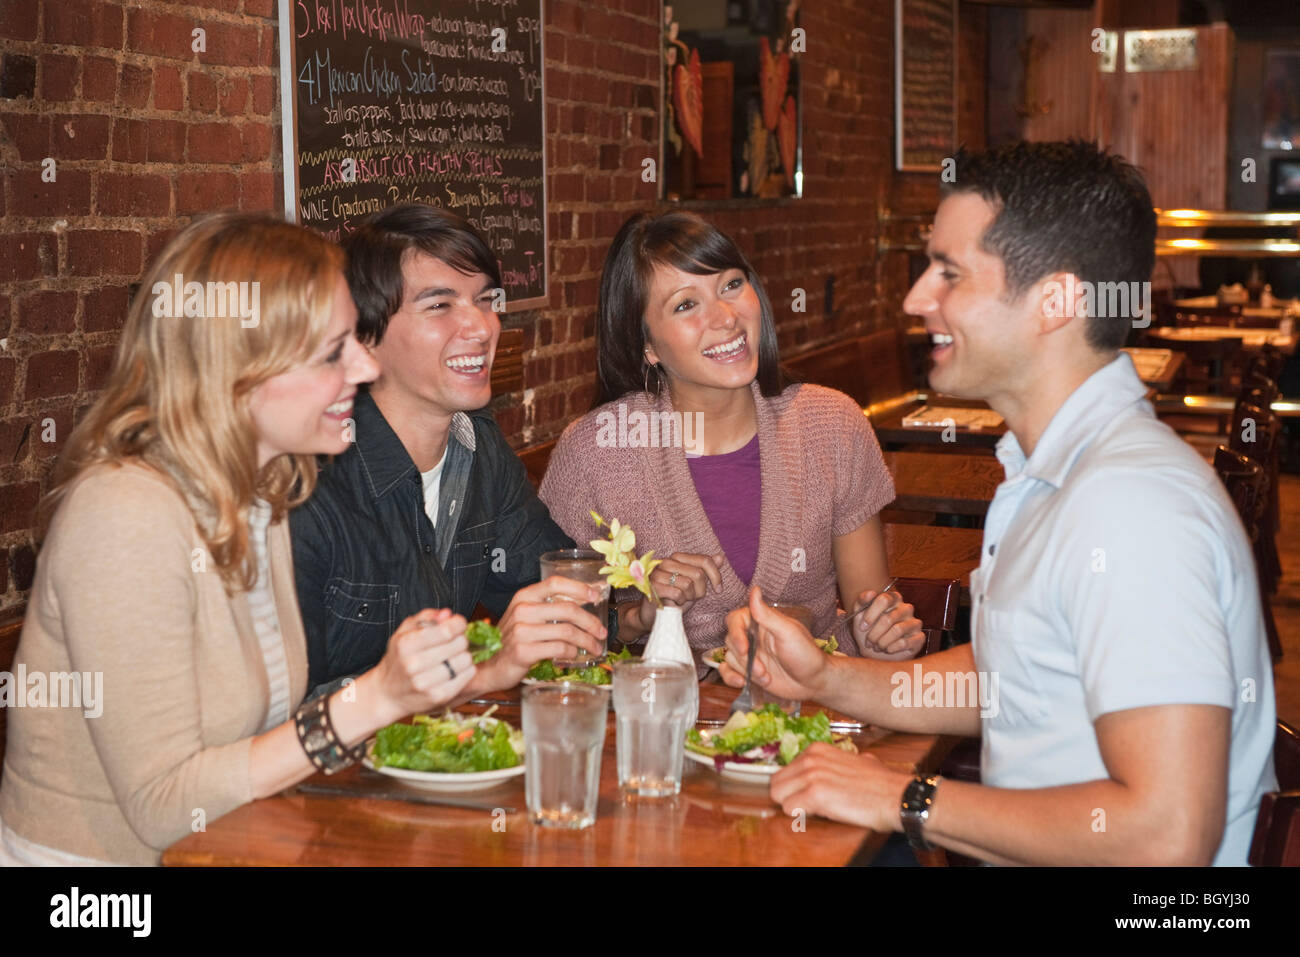 Friends eating at restaurant Stock Photo